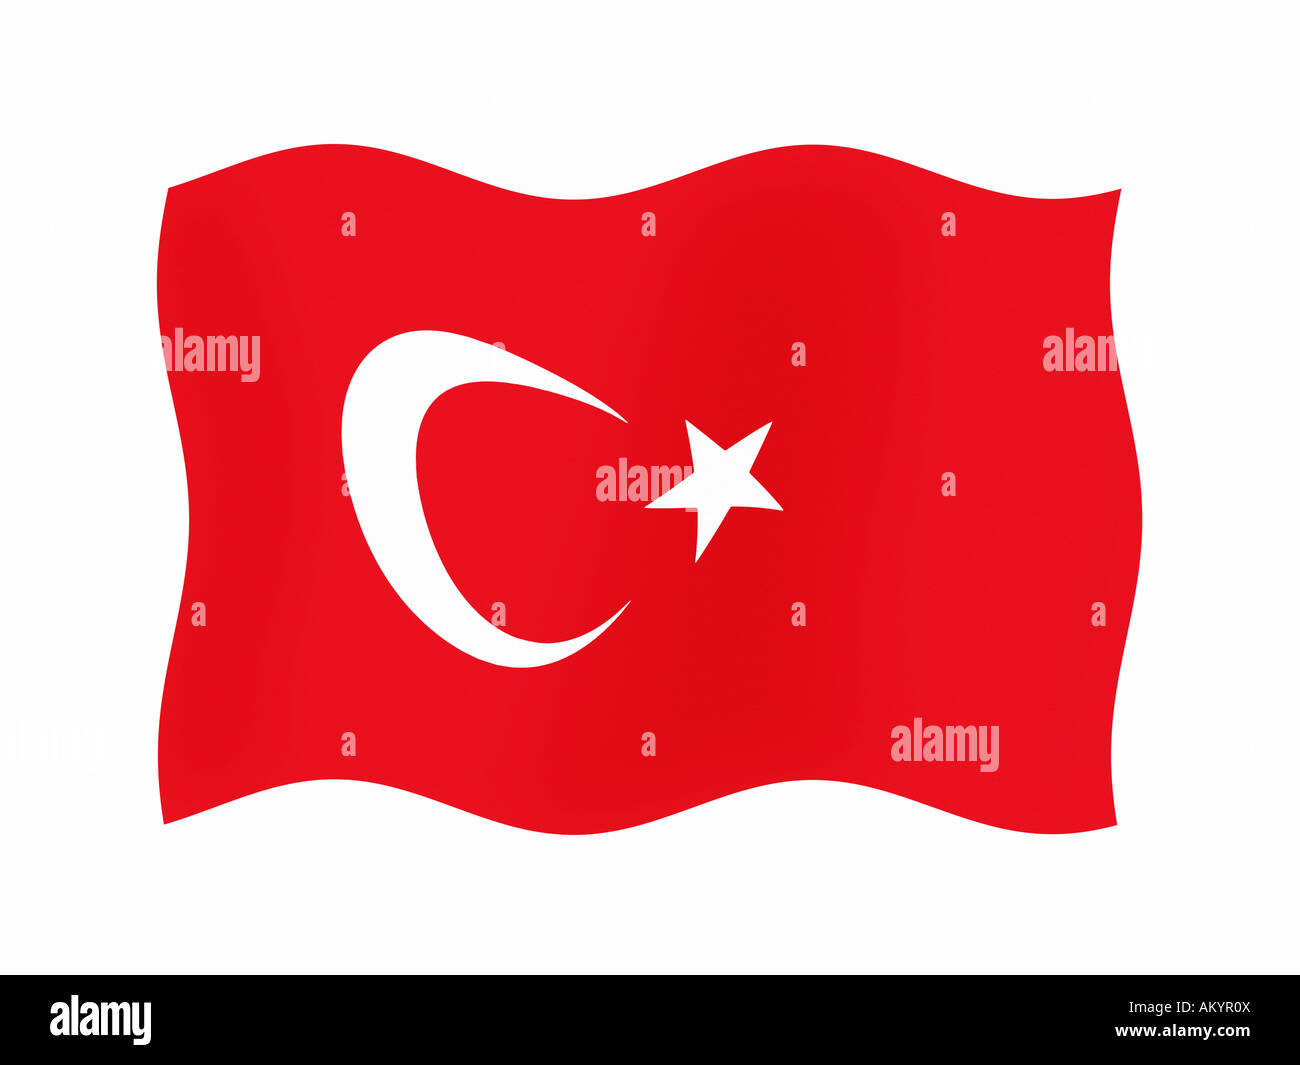 The flag of Turkey - graphic Stock Photo